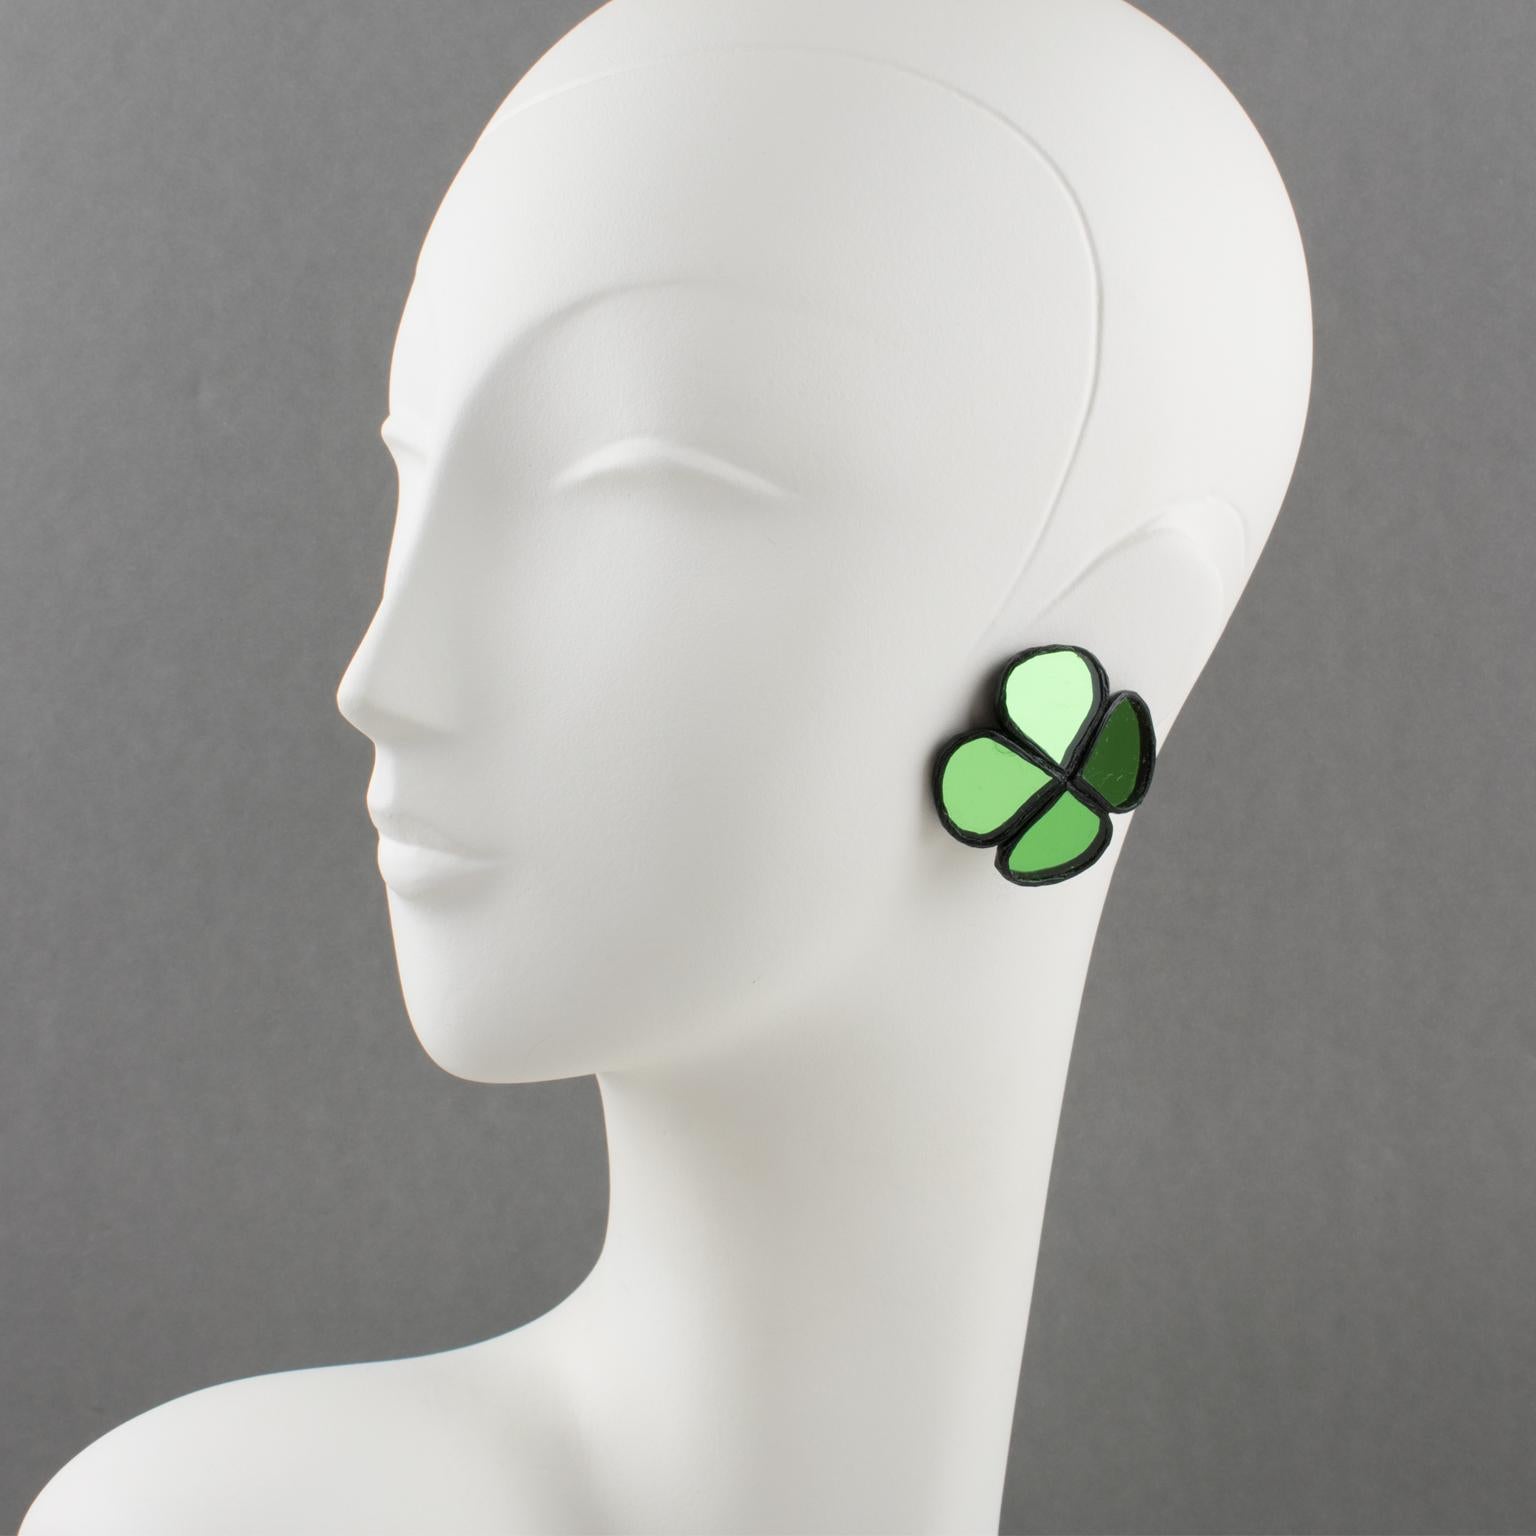 Beautiful Talosel or resin clip-on earrings designed by Irena Jaworska in the 1970s. They feature a geometric four-clover shape in black resin framing, topped with green mirrors. Irena Jaworska is one of the students of the Line Vautrin school,